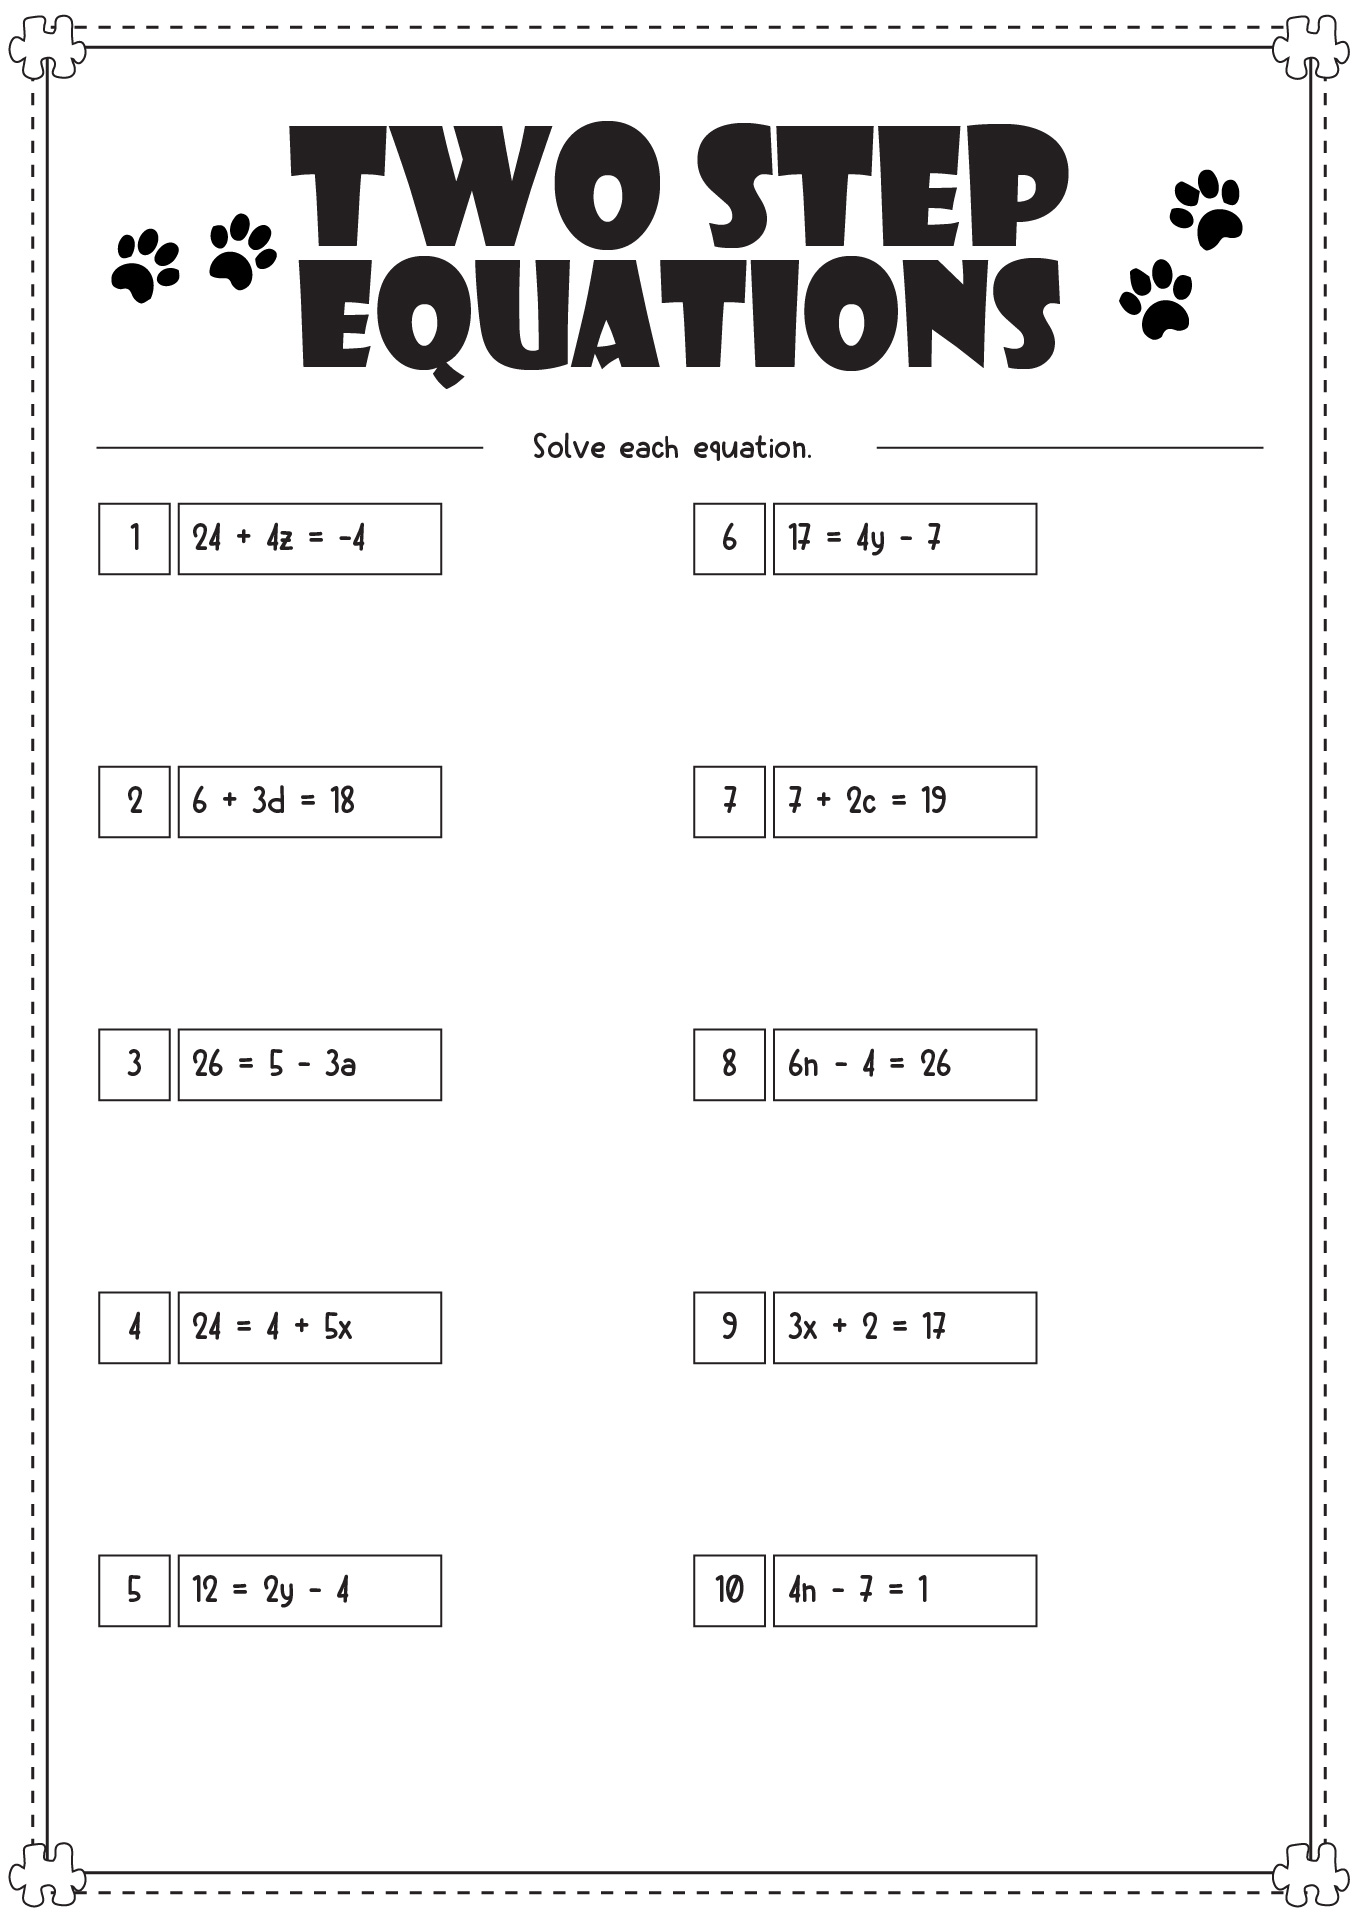 Two-Step Equations Worksheet